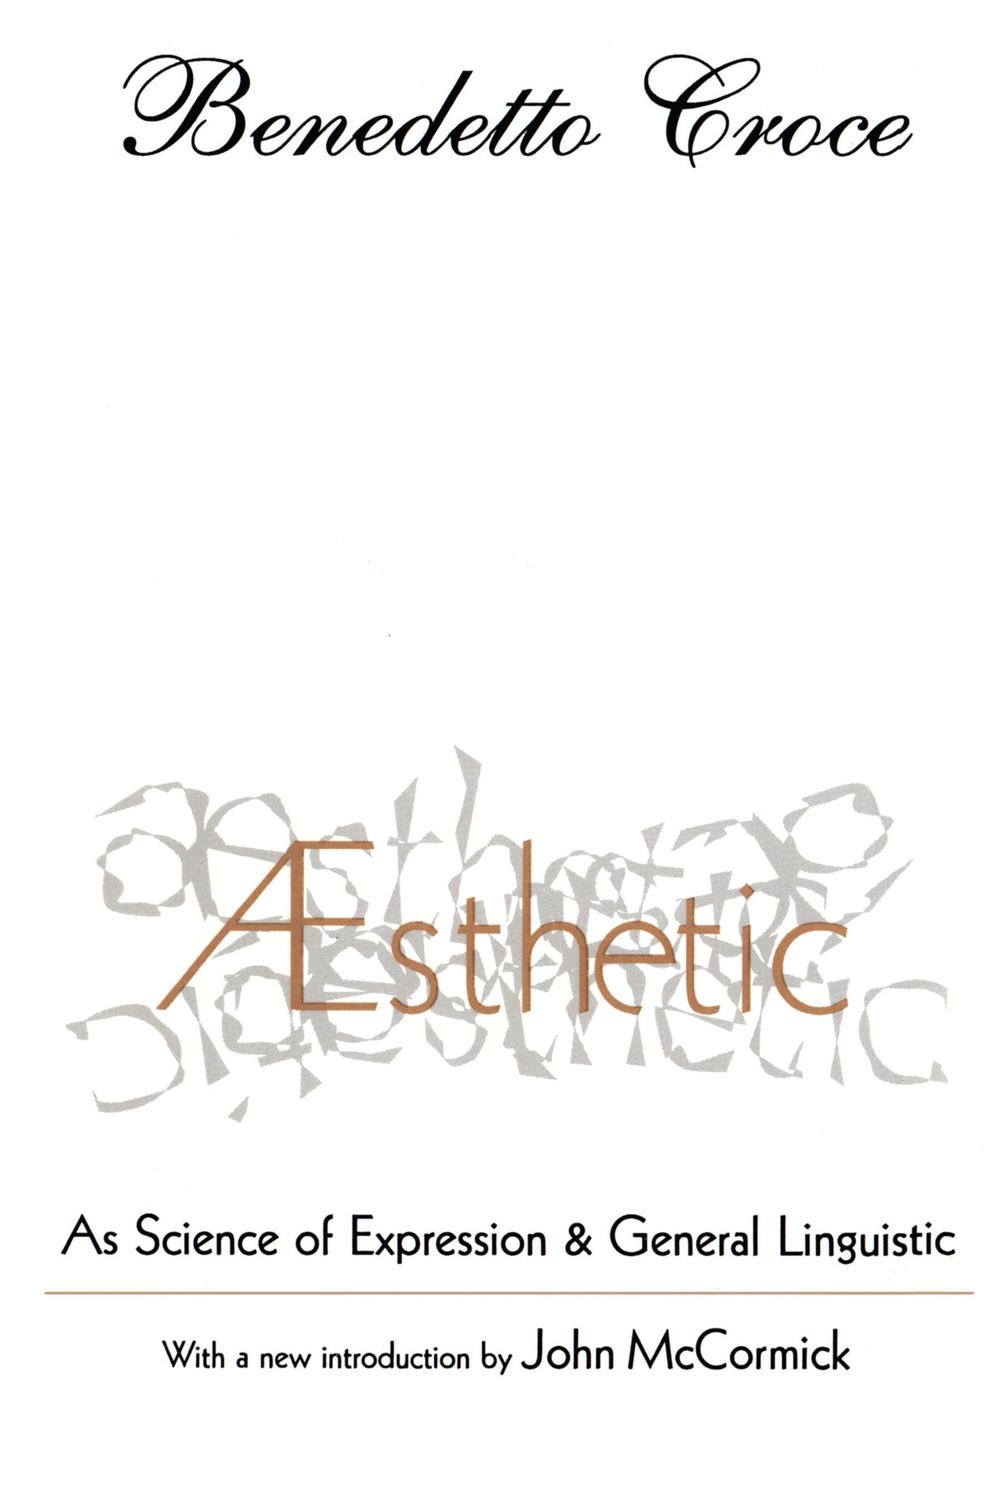 PDF] Aesthetic by Benedetto Croce eBook Perlego